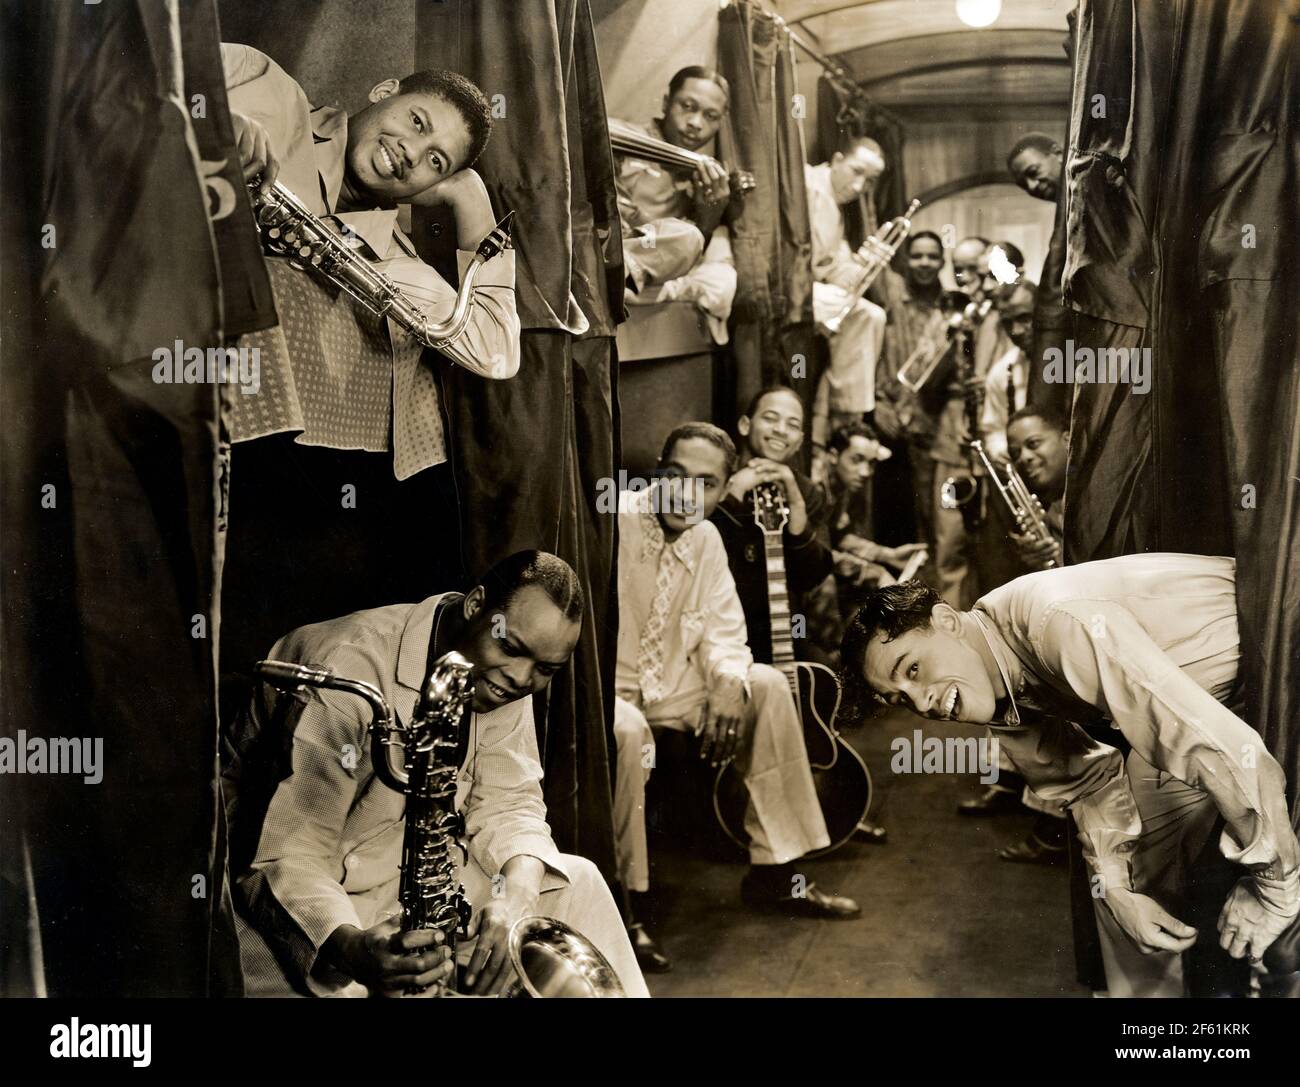 Cab Calloway and His Band in Sleeper Car, 1933 Stock Photo